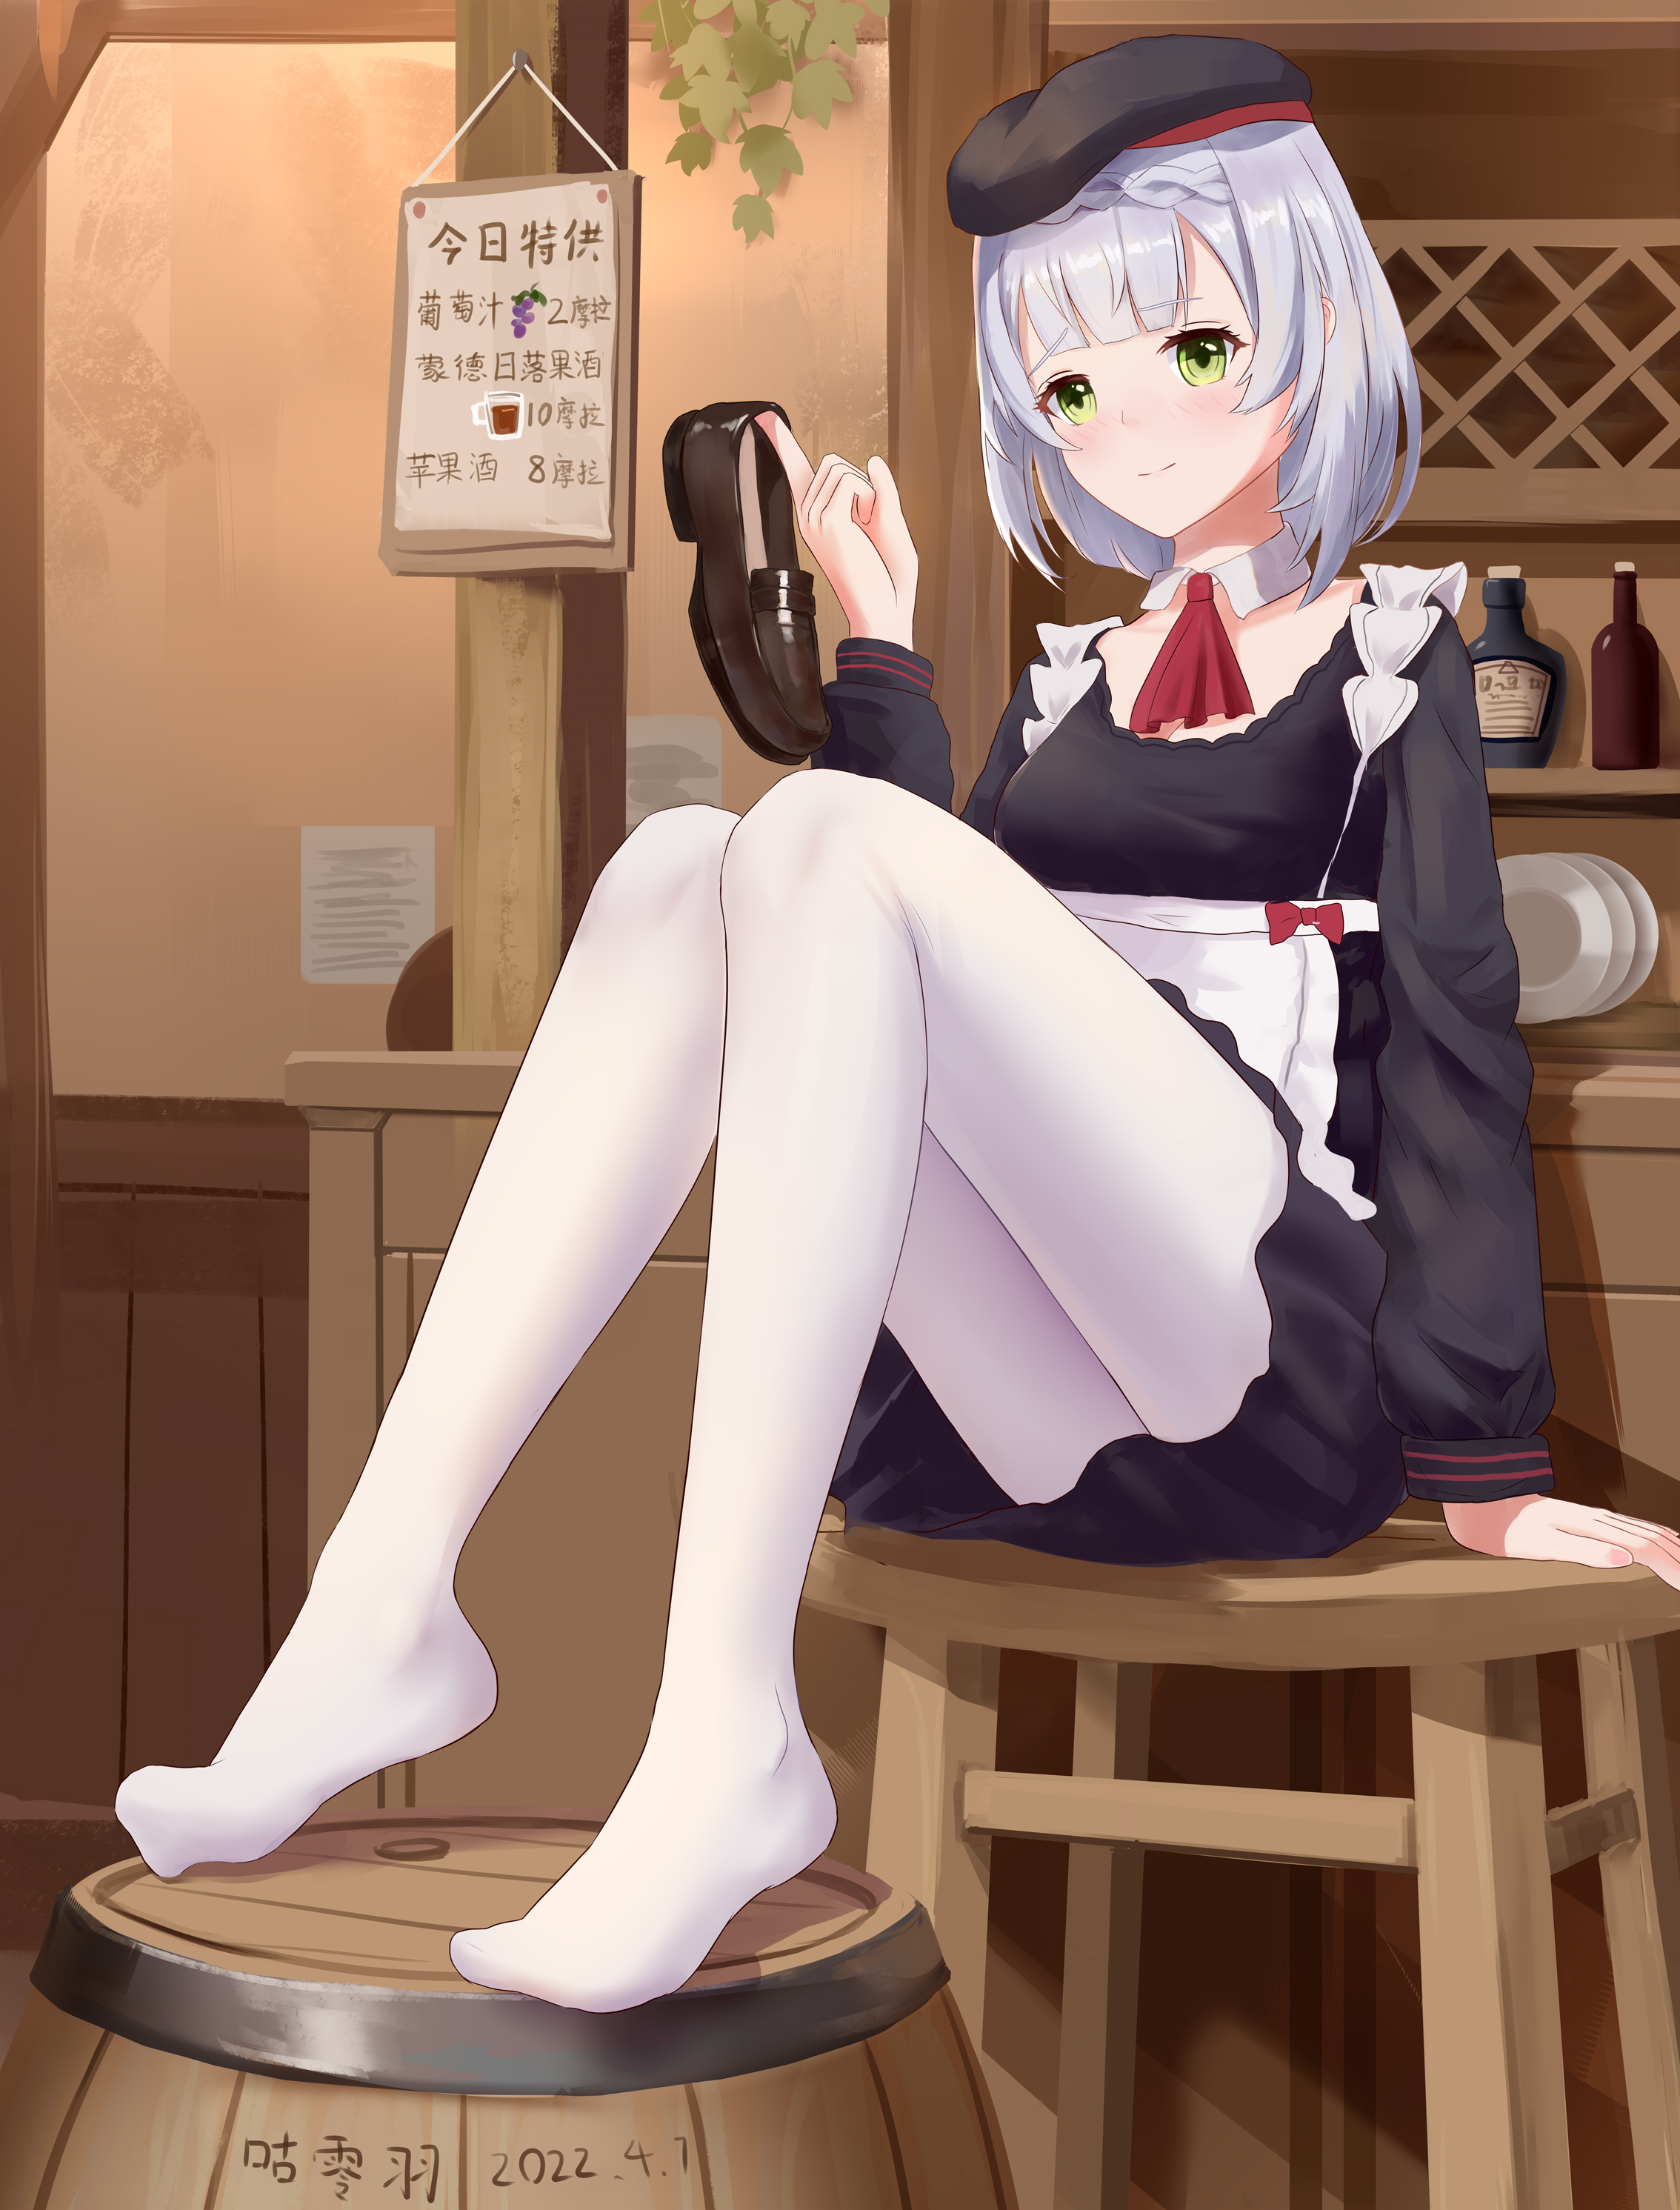 Anime 2268x2983 anime girls portrait display Japanese shoes maid outfit hat barrels blushing Pixiv